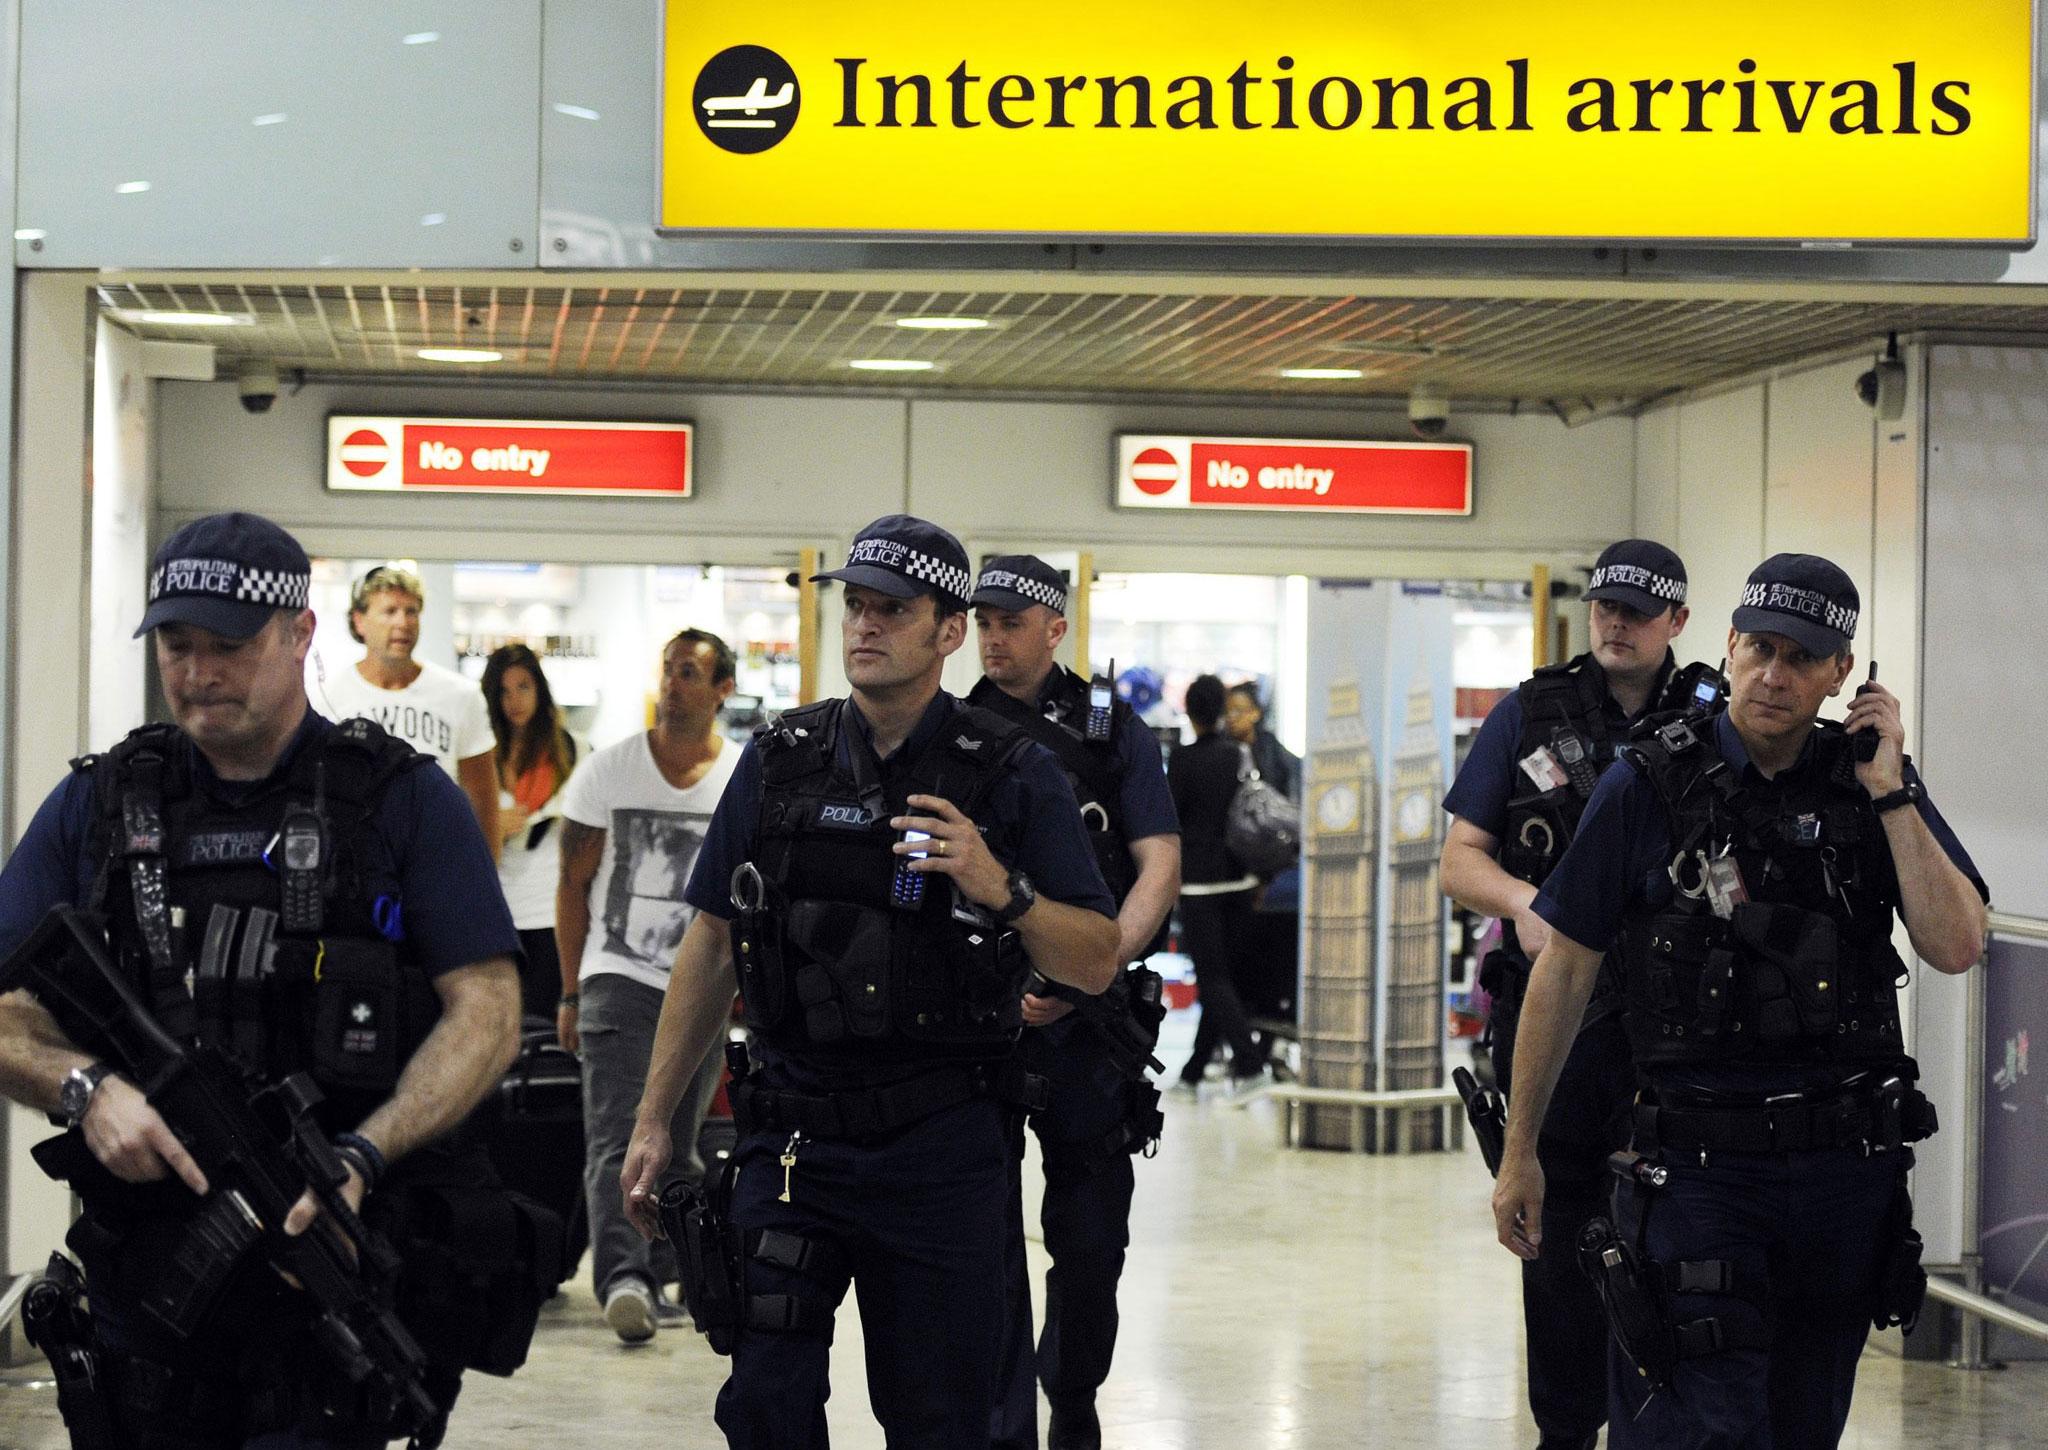 Police at Heathrow airport in London